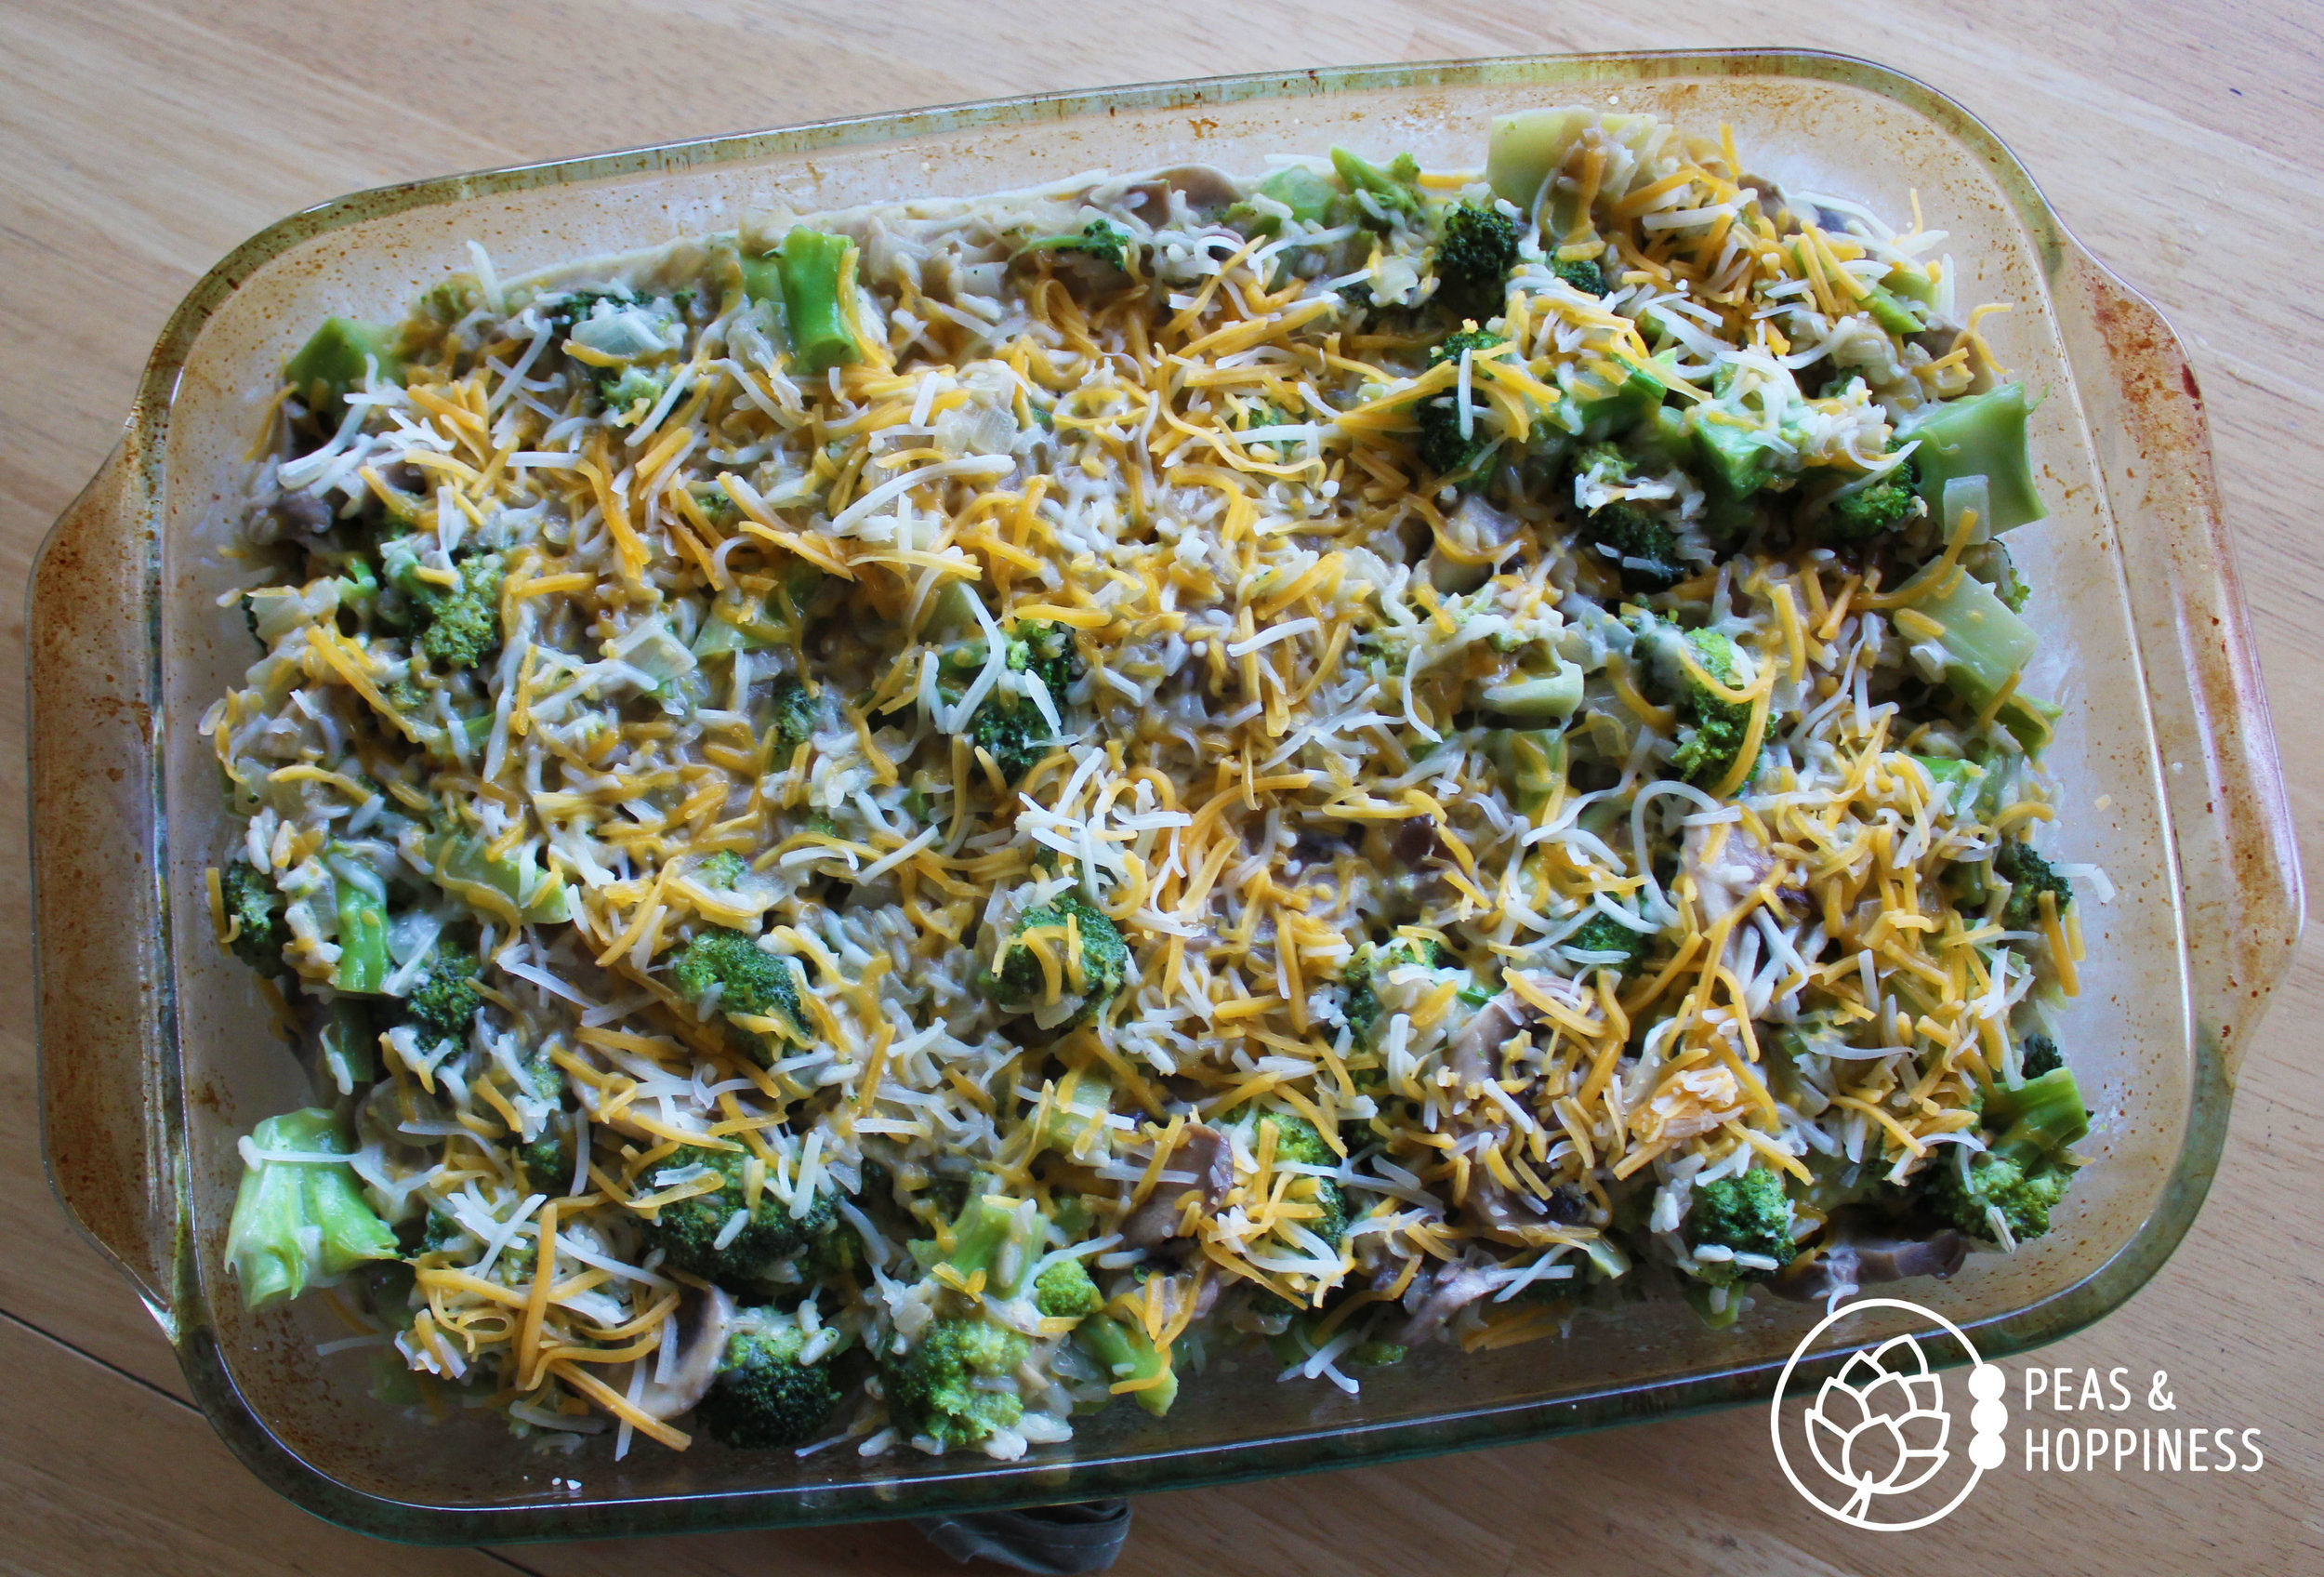 All-Natural Broccoli Rice Casserole from Peas and Hoppiness - www.peasandhoppiness.com